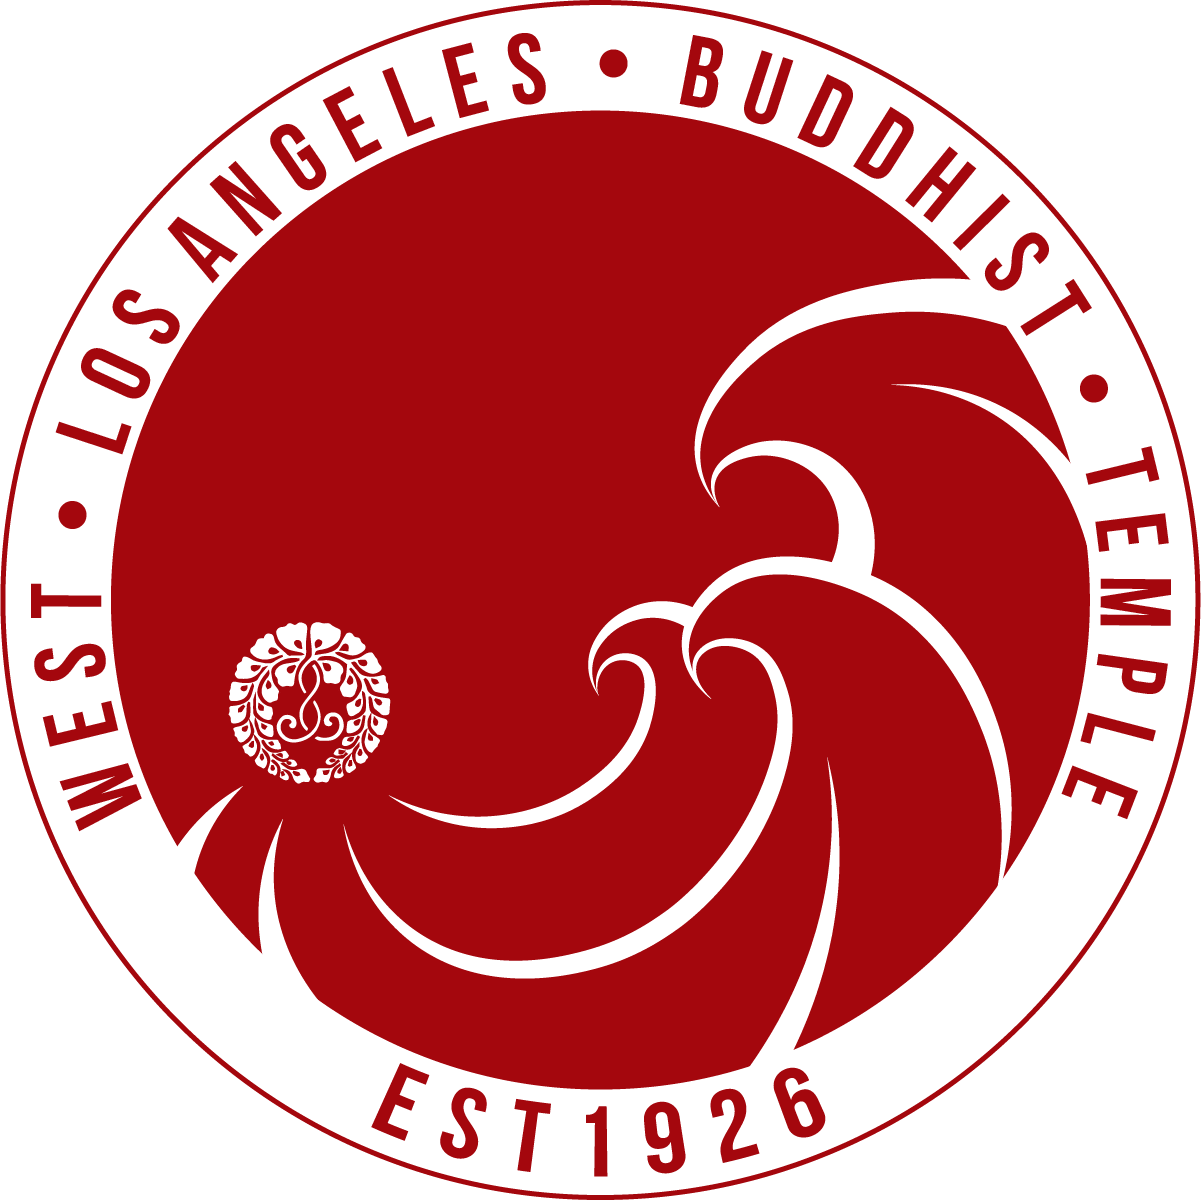 West Los Angeles Buddhist Temple